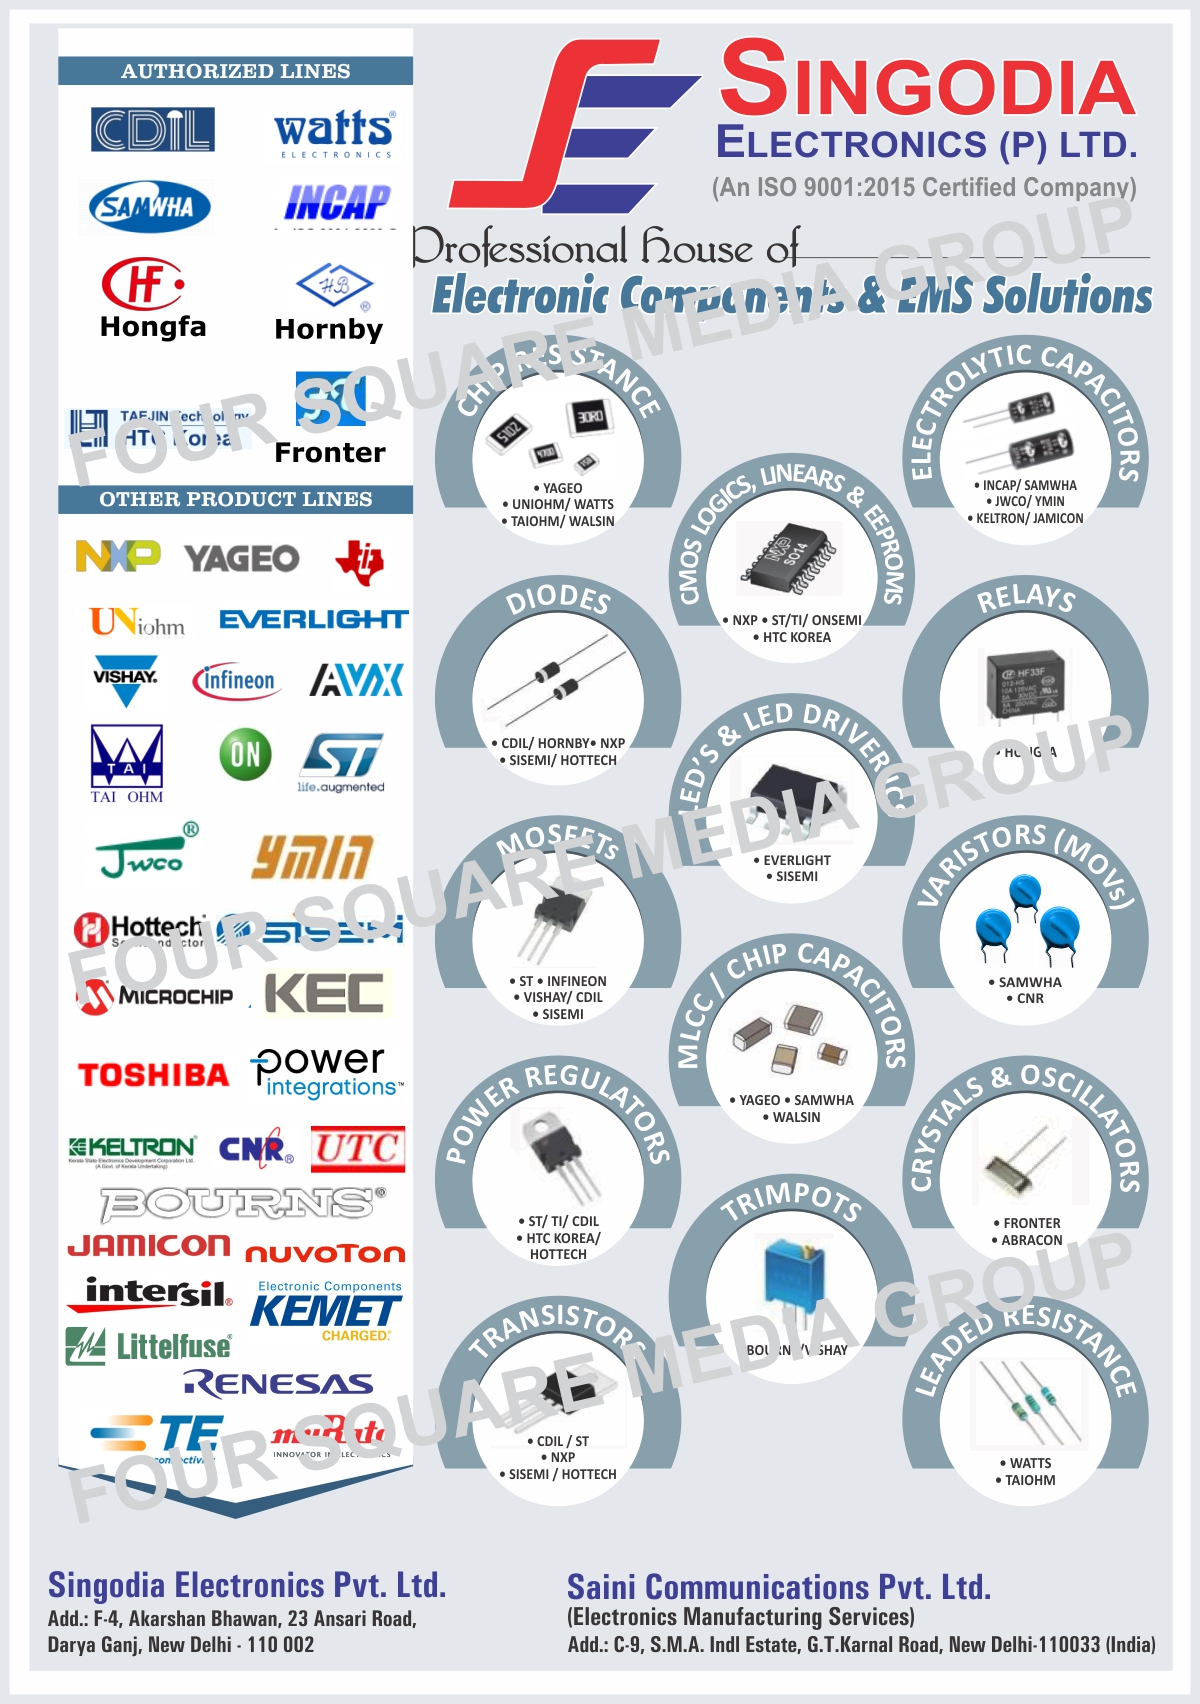 Electronic Components, CMOS Logics, Linears, Transistors, SCRs, Voltage Regulators, Crystals, Eproms, E Eproms, Trimpots, Dials, AD Converters, DA Converters, Tantalum Capacitors, Static Ram, Dynamic Ram, Chip Resistance, MLCC, CMOS Pal, Fast Recovery Diodes, Micro Processors, Schottky Diodes, Microcontrollers, Led Displacys, LCDs, Relays,  Mosfets, IGBTs, Multilayer Capacitors, Connectors, Sockets, Rectifiers, Thyristors, Transistors, Darlington Transistors, Switching Diodes, Zener Diodes, Schottky Barrier Diodes, DIACS, Traics, Transient Voltage Suppressors, Linear Voltage Regulators, Surface Mounted Semiconductors,Power Relay, Hermetically Sealed relay, Automotive Relay, Automotive Module, Signal Relay, Latching Relay, Industrial Relay, Relay Socket, Solid State Relays, MLCC, Radial MLCC, Axial MLCC, LC Filter, Radial Bead Filter, Axial Bead Filter, Emi Filter, Power Capacitors, Quartz Crystal Resonator, Voltage Regulators, LDO Voltage Regulators, VLDO Voltage Regulators, CMOS ULDO Voltage Regulators, DDR termination Switch, USB Switch, Step Down Swithing Voltage Regulators, LED Drivers, Signal Conditioning, Din Connectors, Emi RFI Filters, Fuse Holders, Power Distribution Units, Sockets, Power Entry, Radial Capacitor, Non Polar Capacitor, Bi Polar Capacitor, Low ESR Capacitor, Low Voltage Capacitor, Switching Diodes, Monolithic Crystal Filter, Clock Oscillator, Power Module, SMD Aluminium E Cap, Aluminium E Cap, Ferrite Core, Varistor, DCC, TVS Rectifier, Bridge Rectifier, NTC, SPD, Active Electronic Component, Passive Electronic Components, EMS Solutions, Electrolytic Capacitors, Diodes, CMOS Linears, CMOS Eeproms, Relays, Led Driver Ics, Led Driver Integrated Circuits, MLCC Capacitors, Chip Capacitors, Oscillators, Transistors, Leaded Resistances, Power Regulators